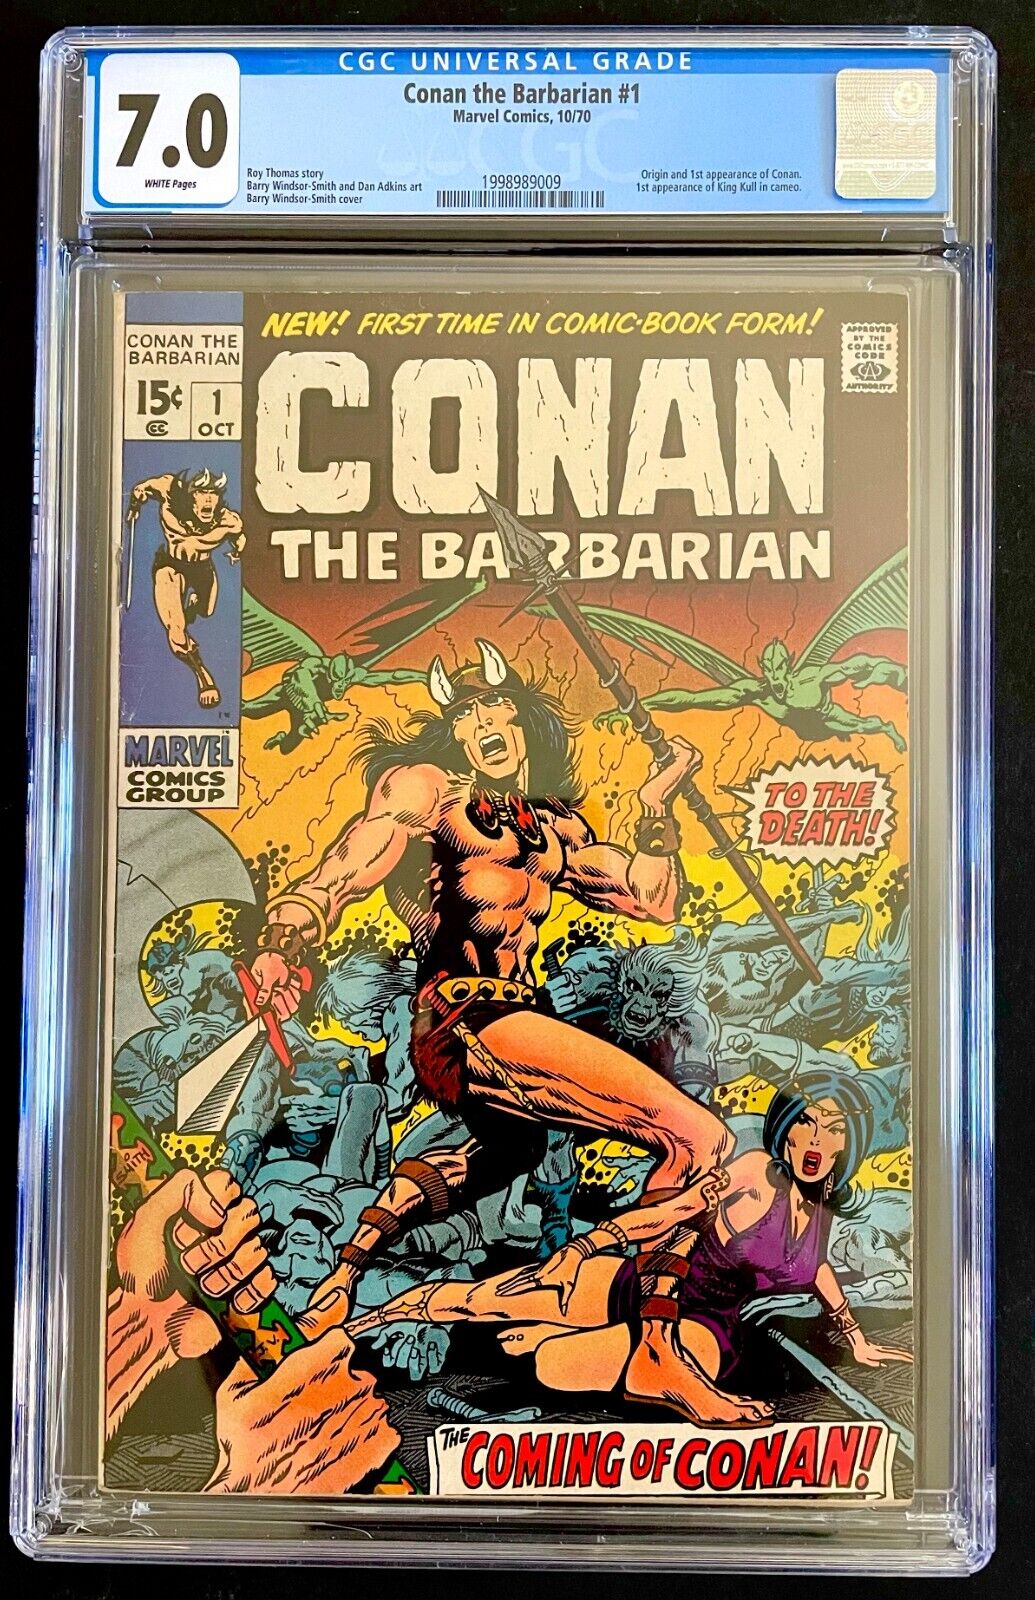 Conan The Barbarian #1  - CGC 7.0 WHITE PAGES - Bronze Age Marvel Key